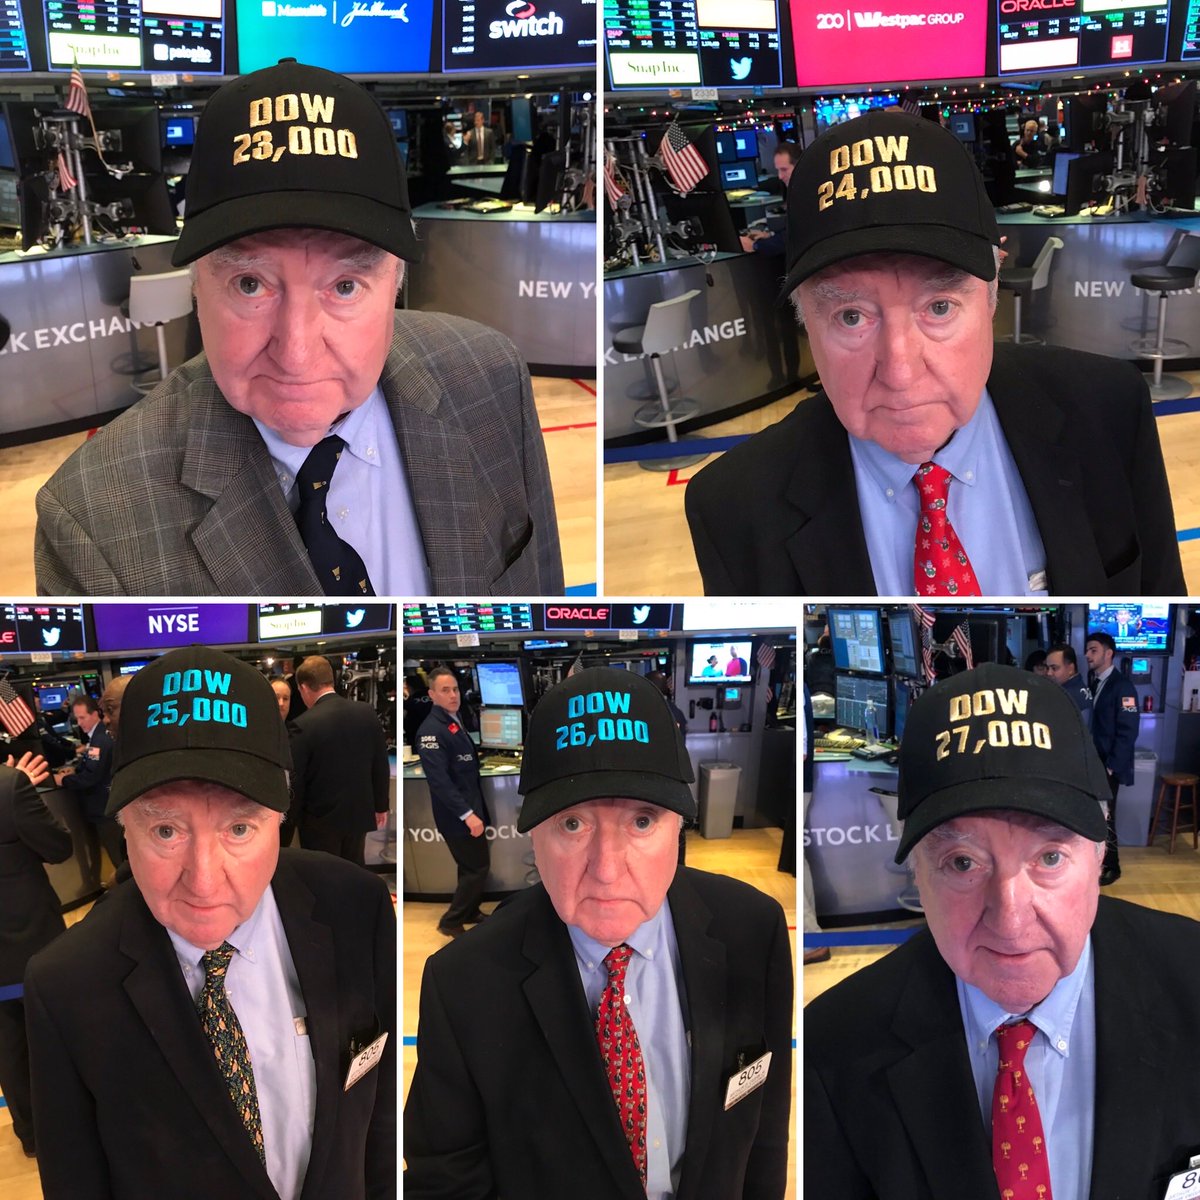 Big, round, Dow milestones will always make me think of Art Cashin. We trust he’s watching from home today. ⁦@CNBC⁩ ⁦@NYSE⁩ #Dow40k